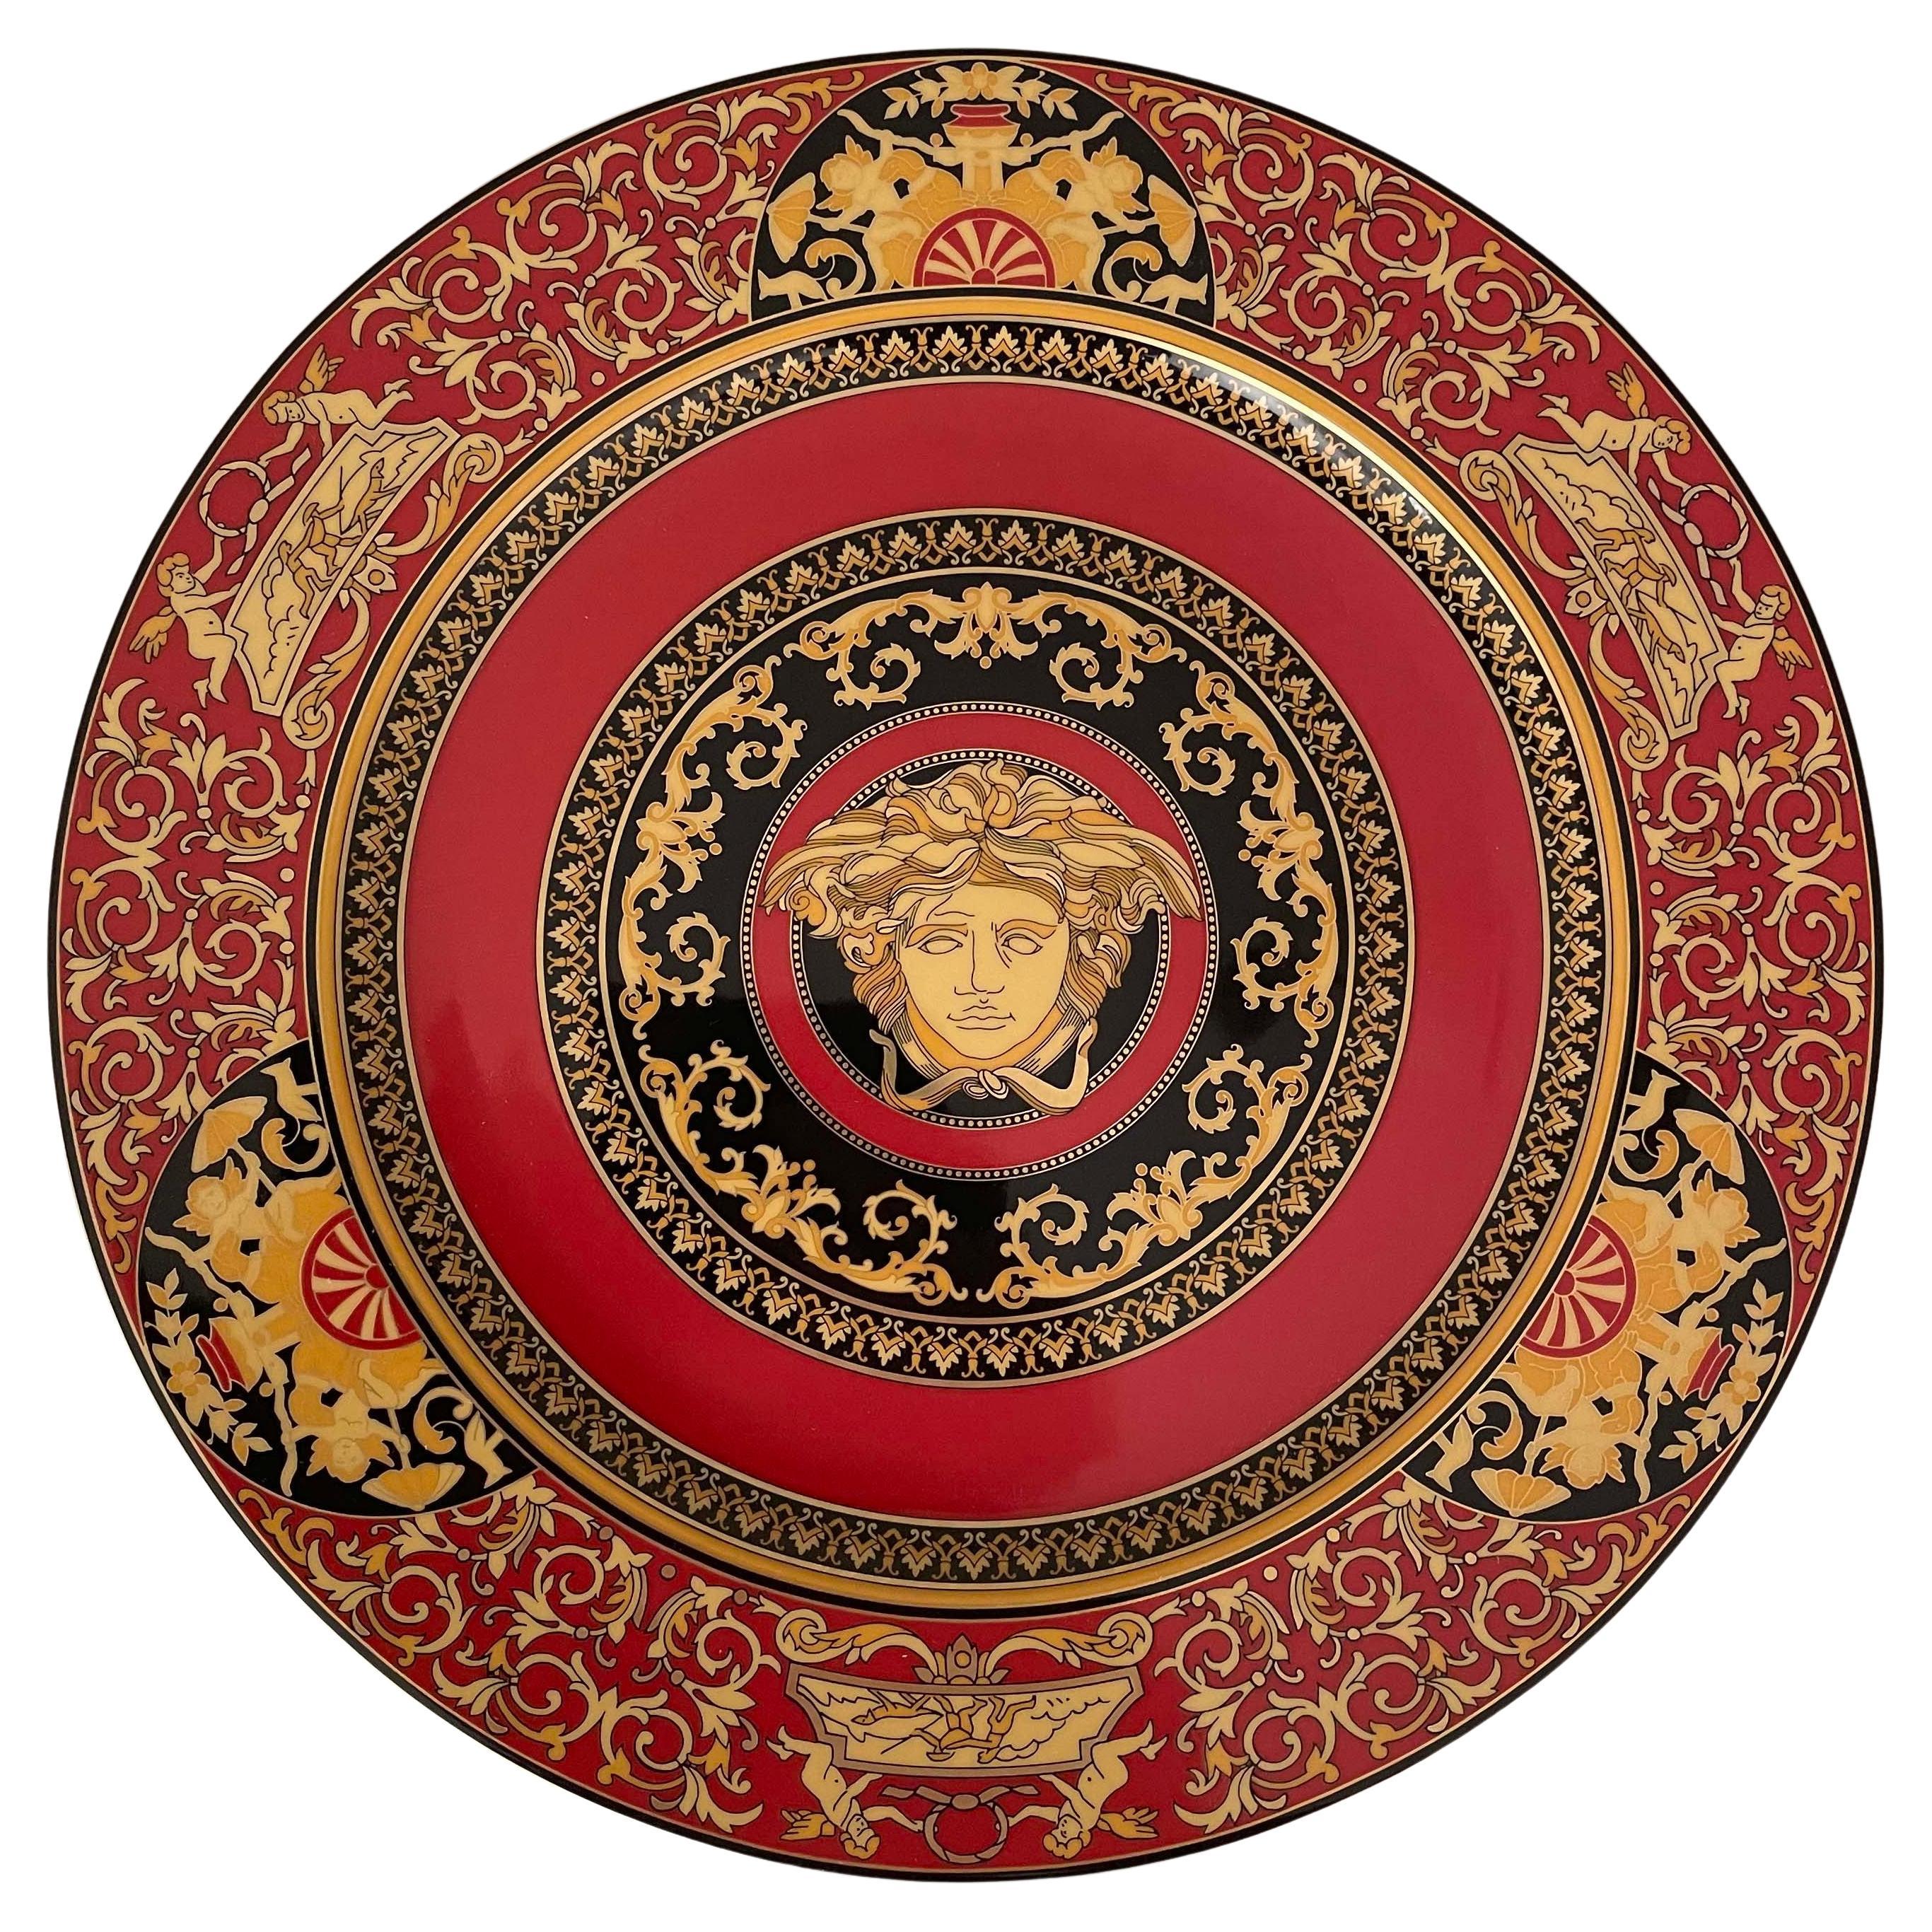  Red Versace Porcelain Medusa Display Plate By Rosenthal, 20th Century For Sale